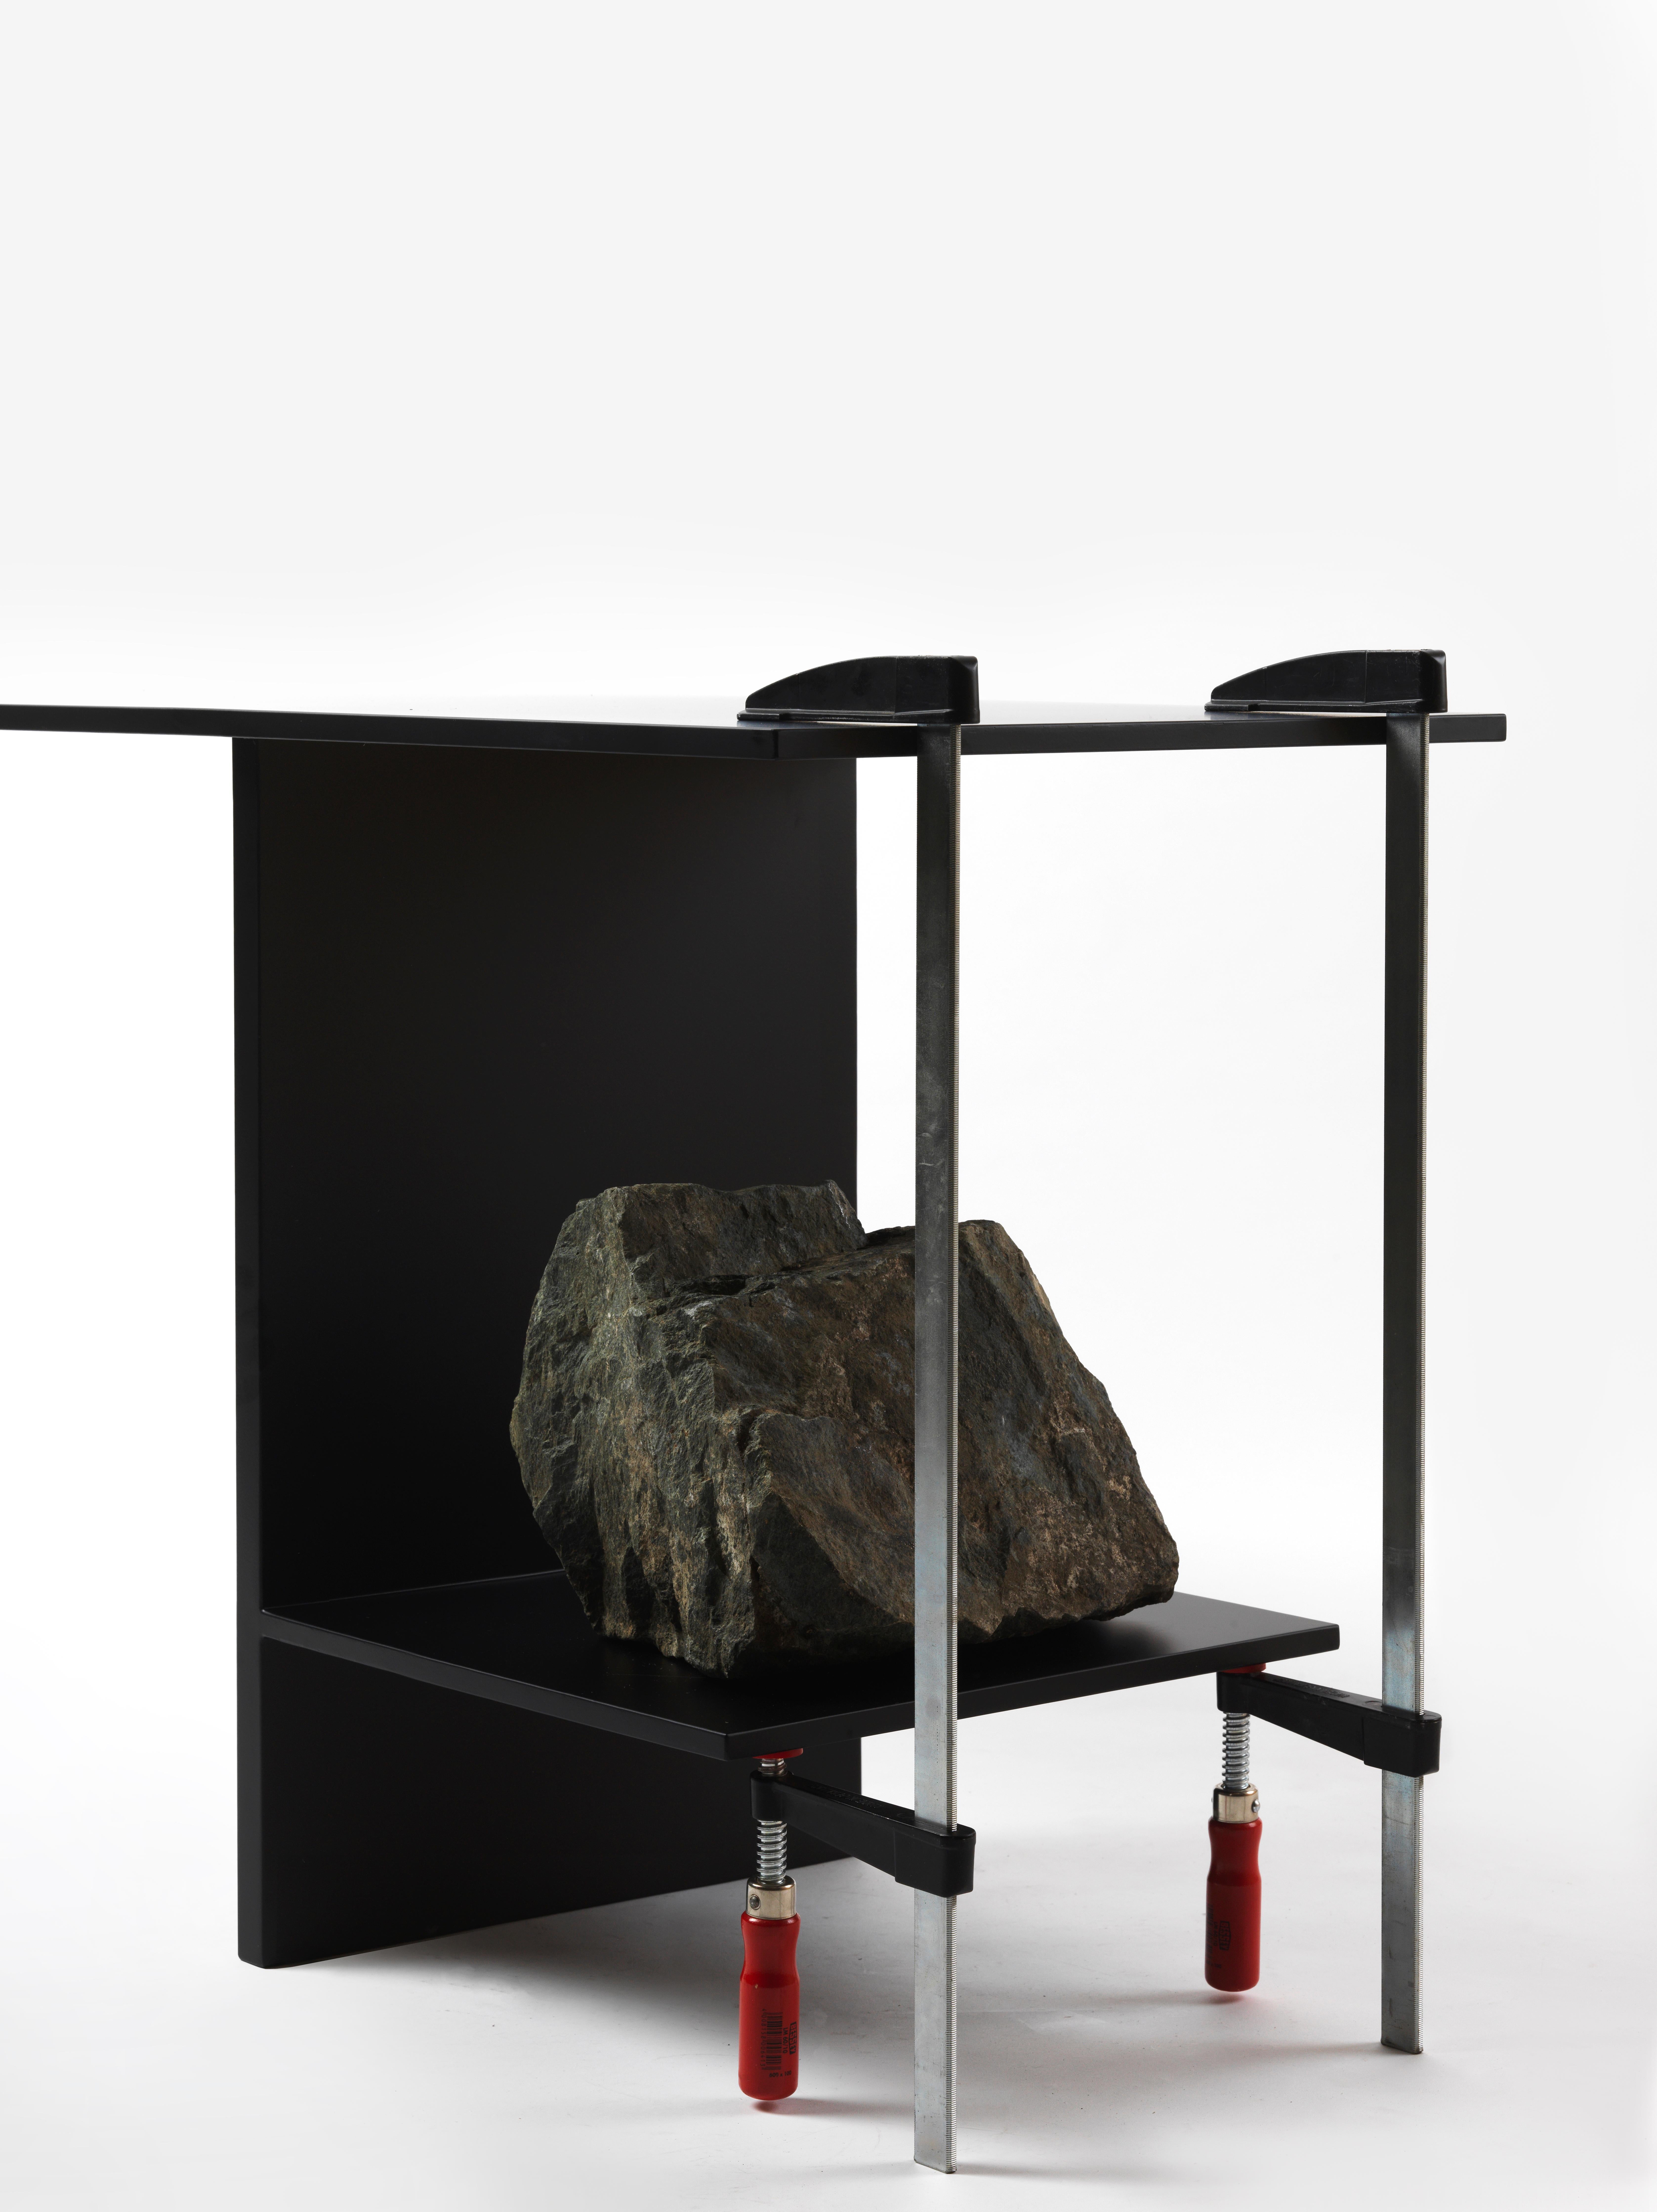 Balance table by Lee Sisan, 2019
Dimensions : W 130 x D 45 x H 65 cm
Materials : Powder Coated Steel, Natural Stone

Each piece is made to order and uses natural stones, so please expect some variability in design.

The clamp, the iron plate, and